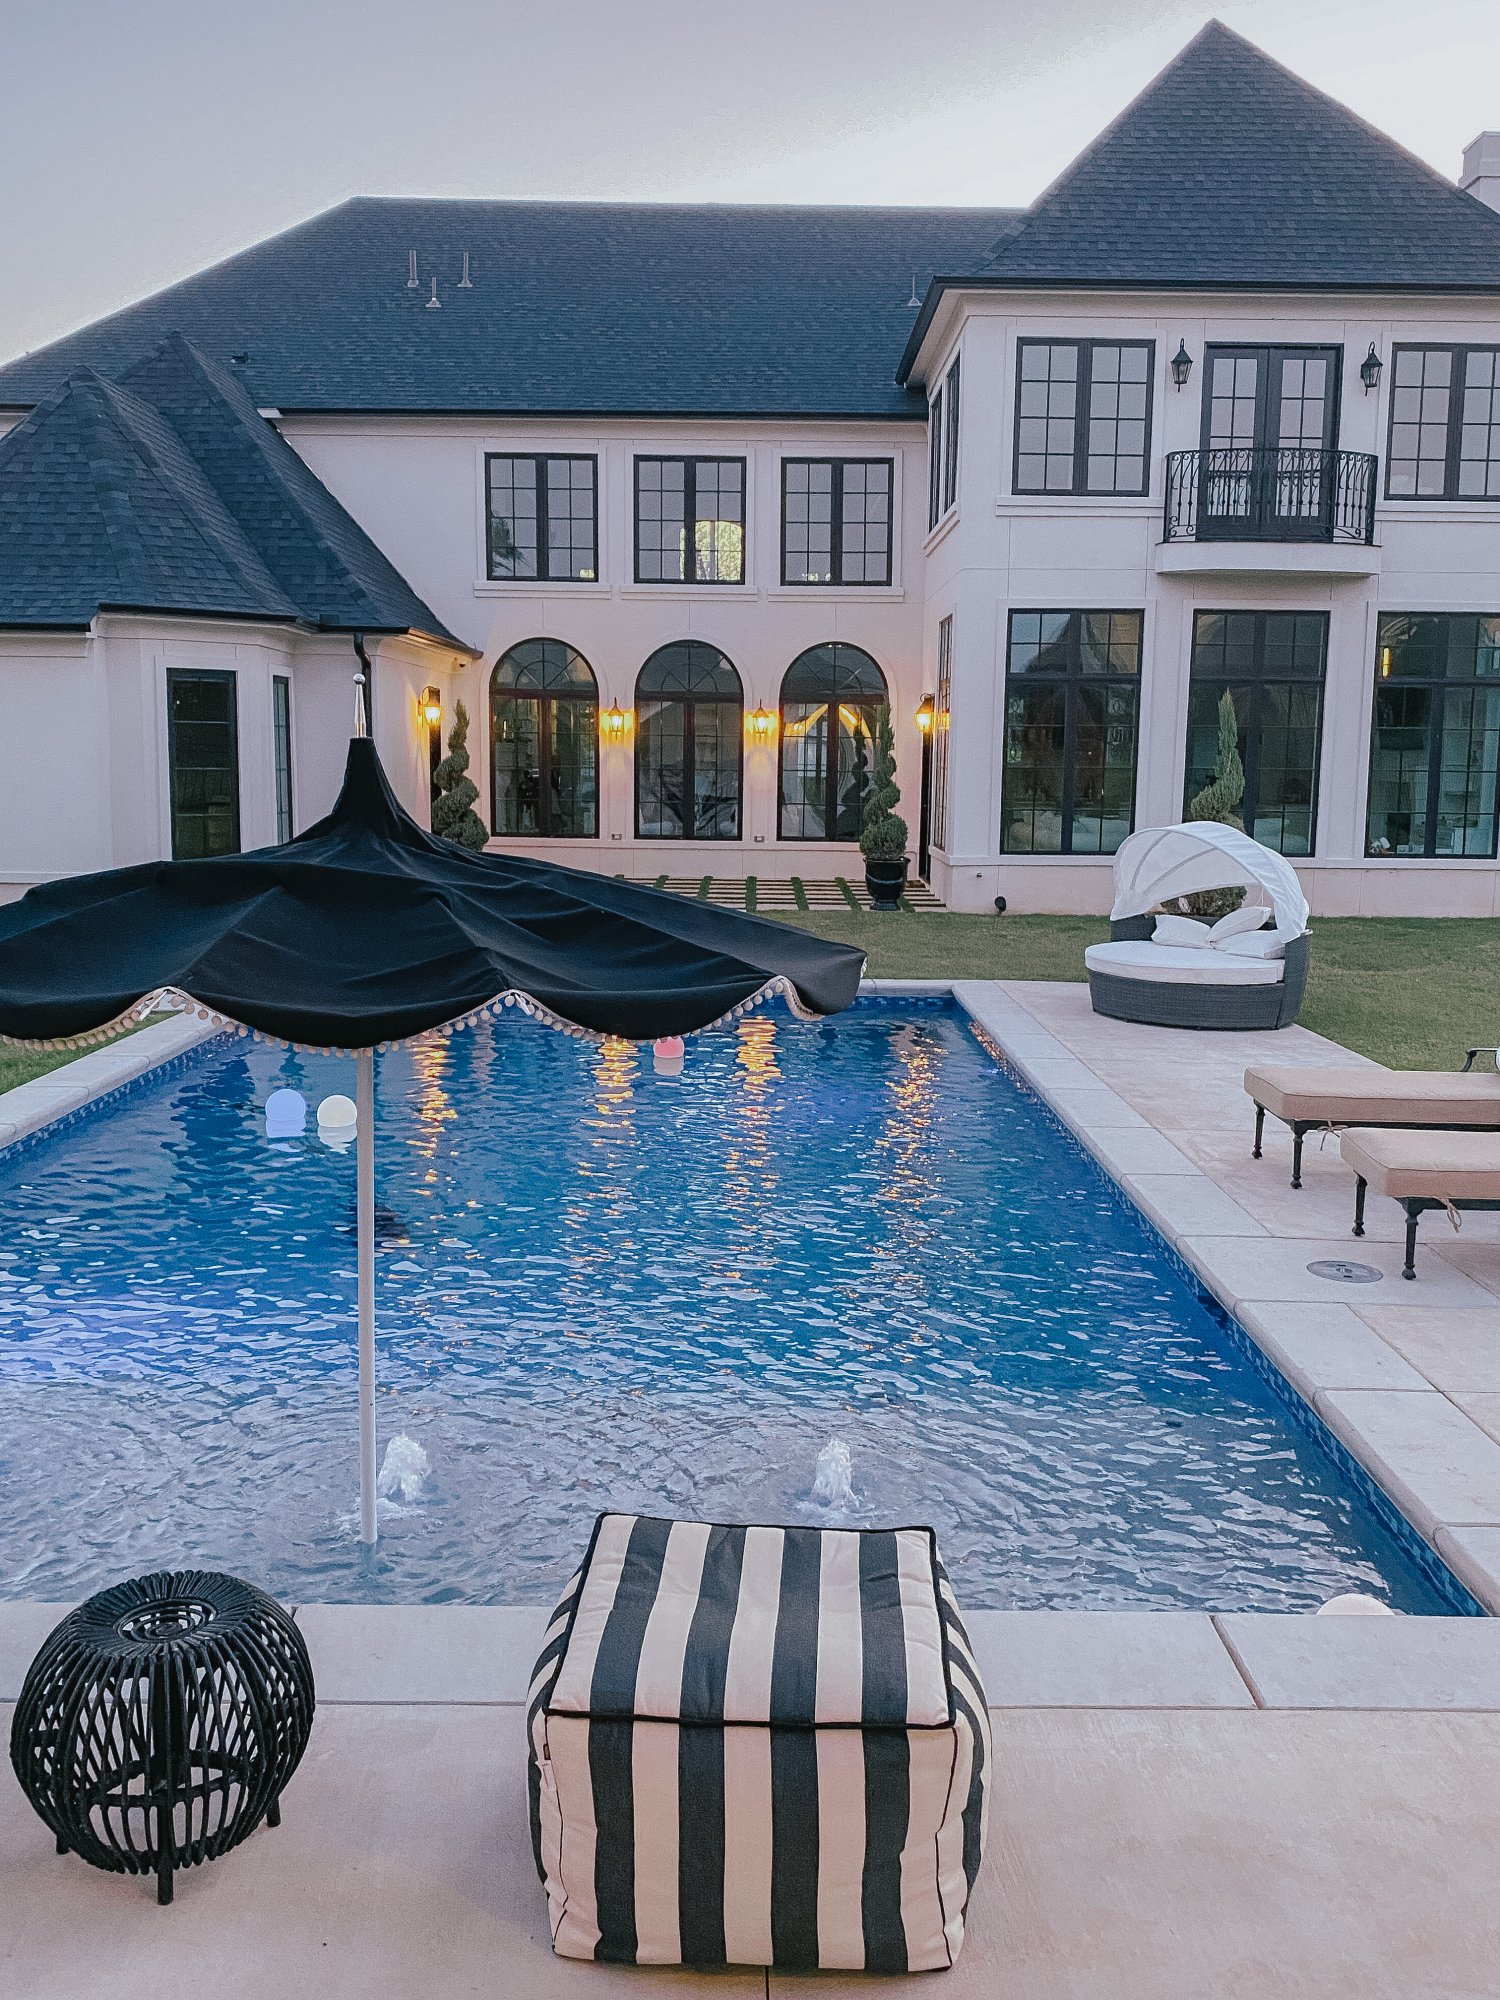 Backyard Decor by popular US life and style blog, The Sweetest Thing: image of a backyard pool, black and white stripe pouf, floating pool orbs, black umbrella with white pom-pom fringe, black and white strip lumbar pillows, and lounge chairs with tan cushions. 